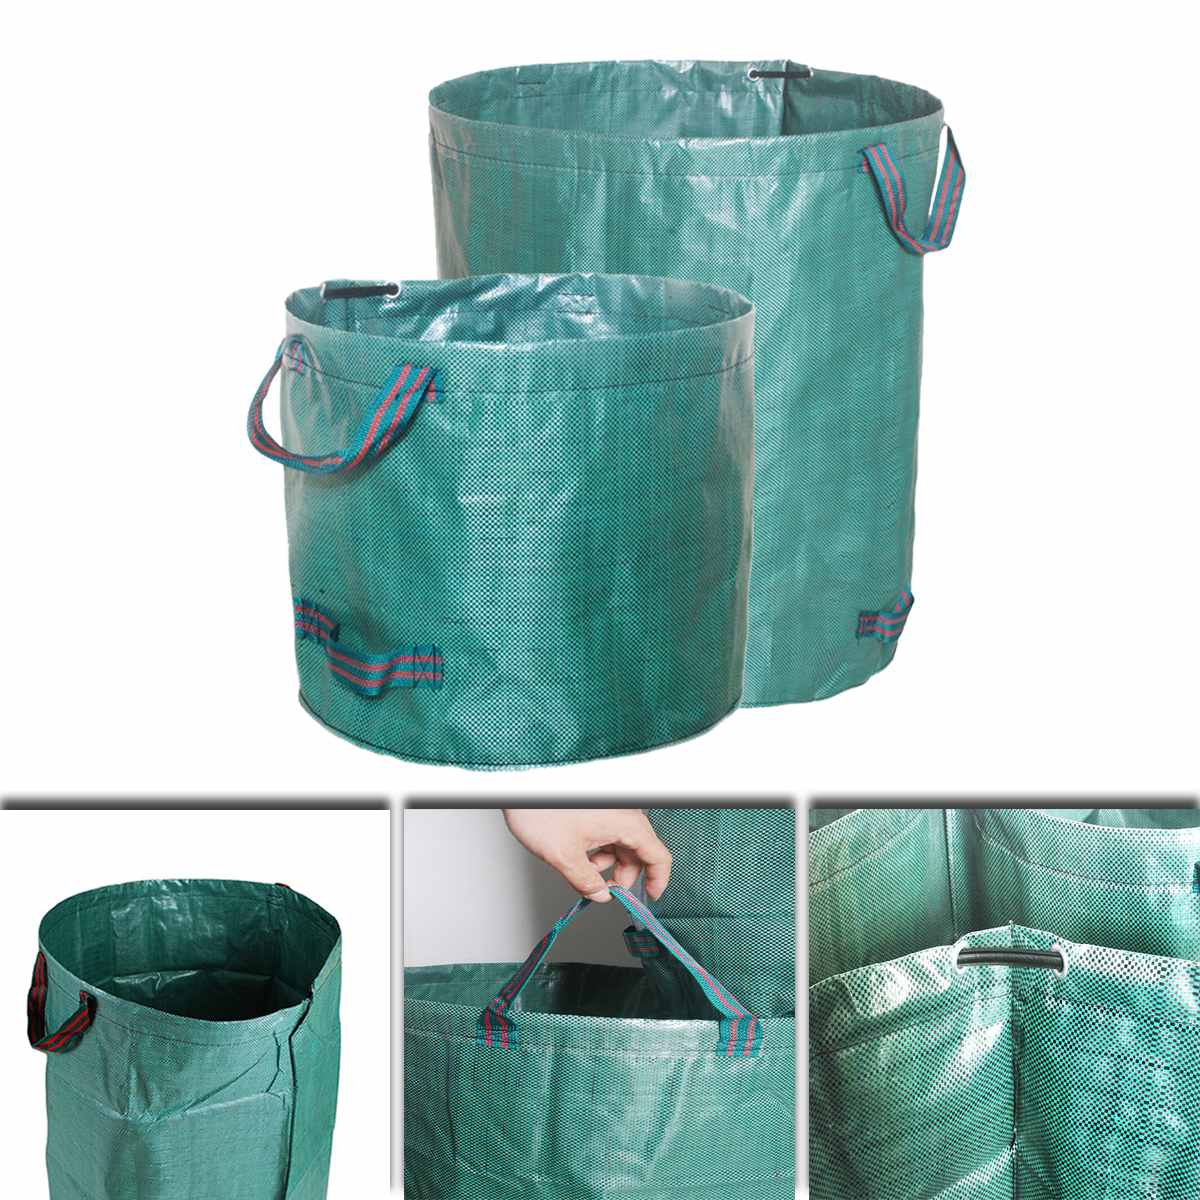 60L/120L/272L Large Capacity Heavy Duty Garden Waste Bag Durable Reusable Waterproof PP Yard Leaf Weeds Grass Container Storage